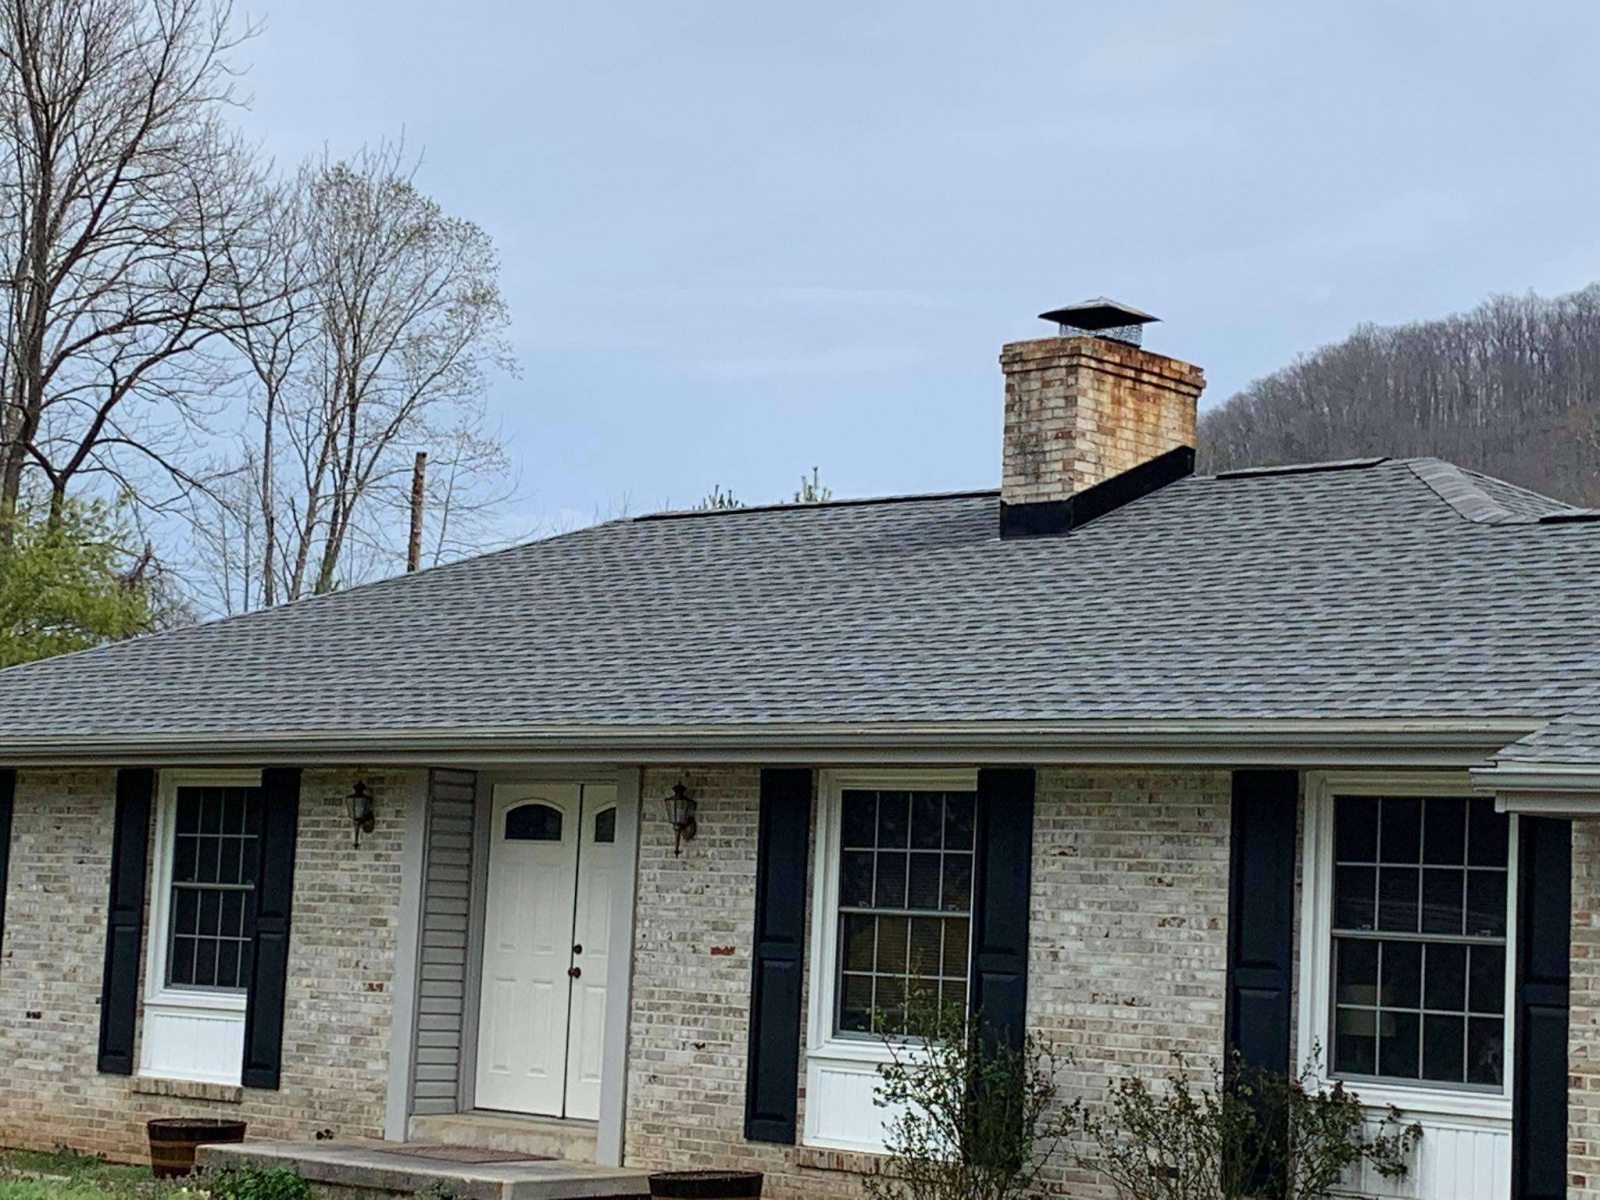 Gallery Roofing Roofing Company Roof Replacement Roanoke